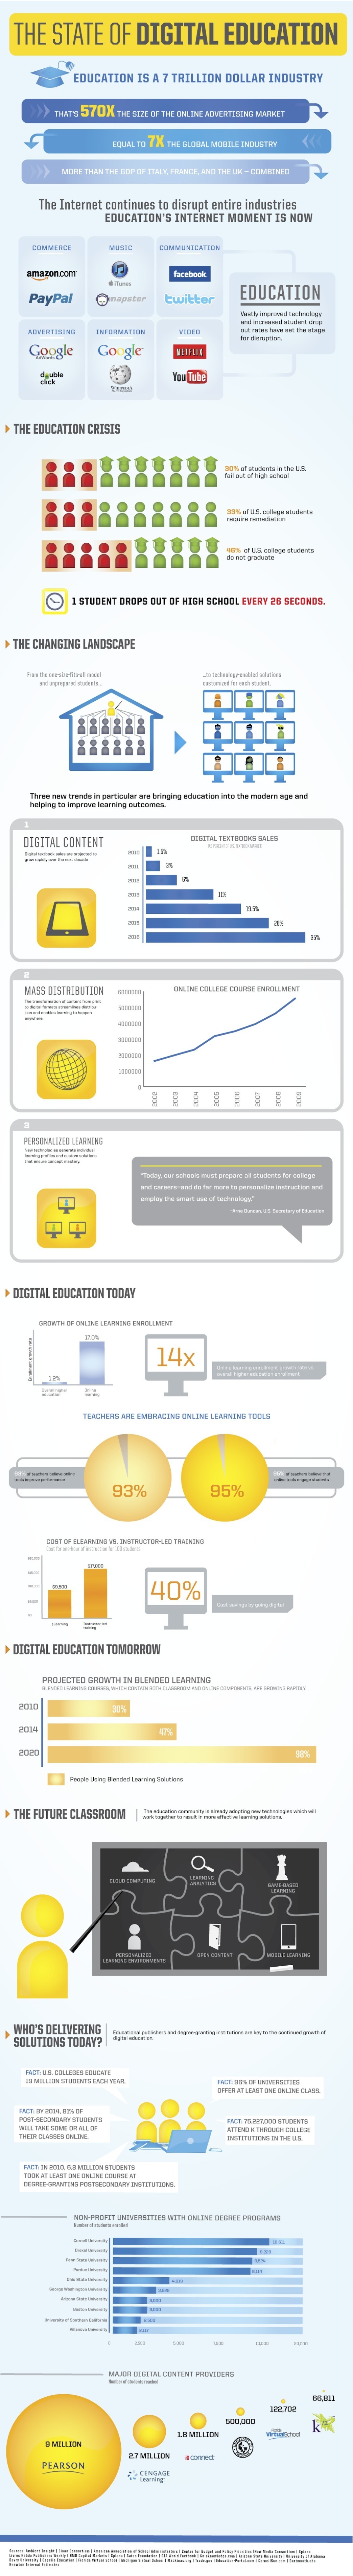 The State of Digital Education Infographic